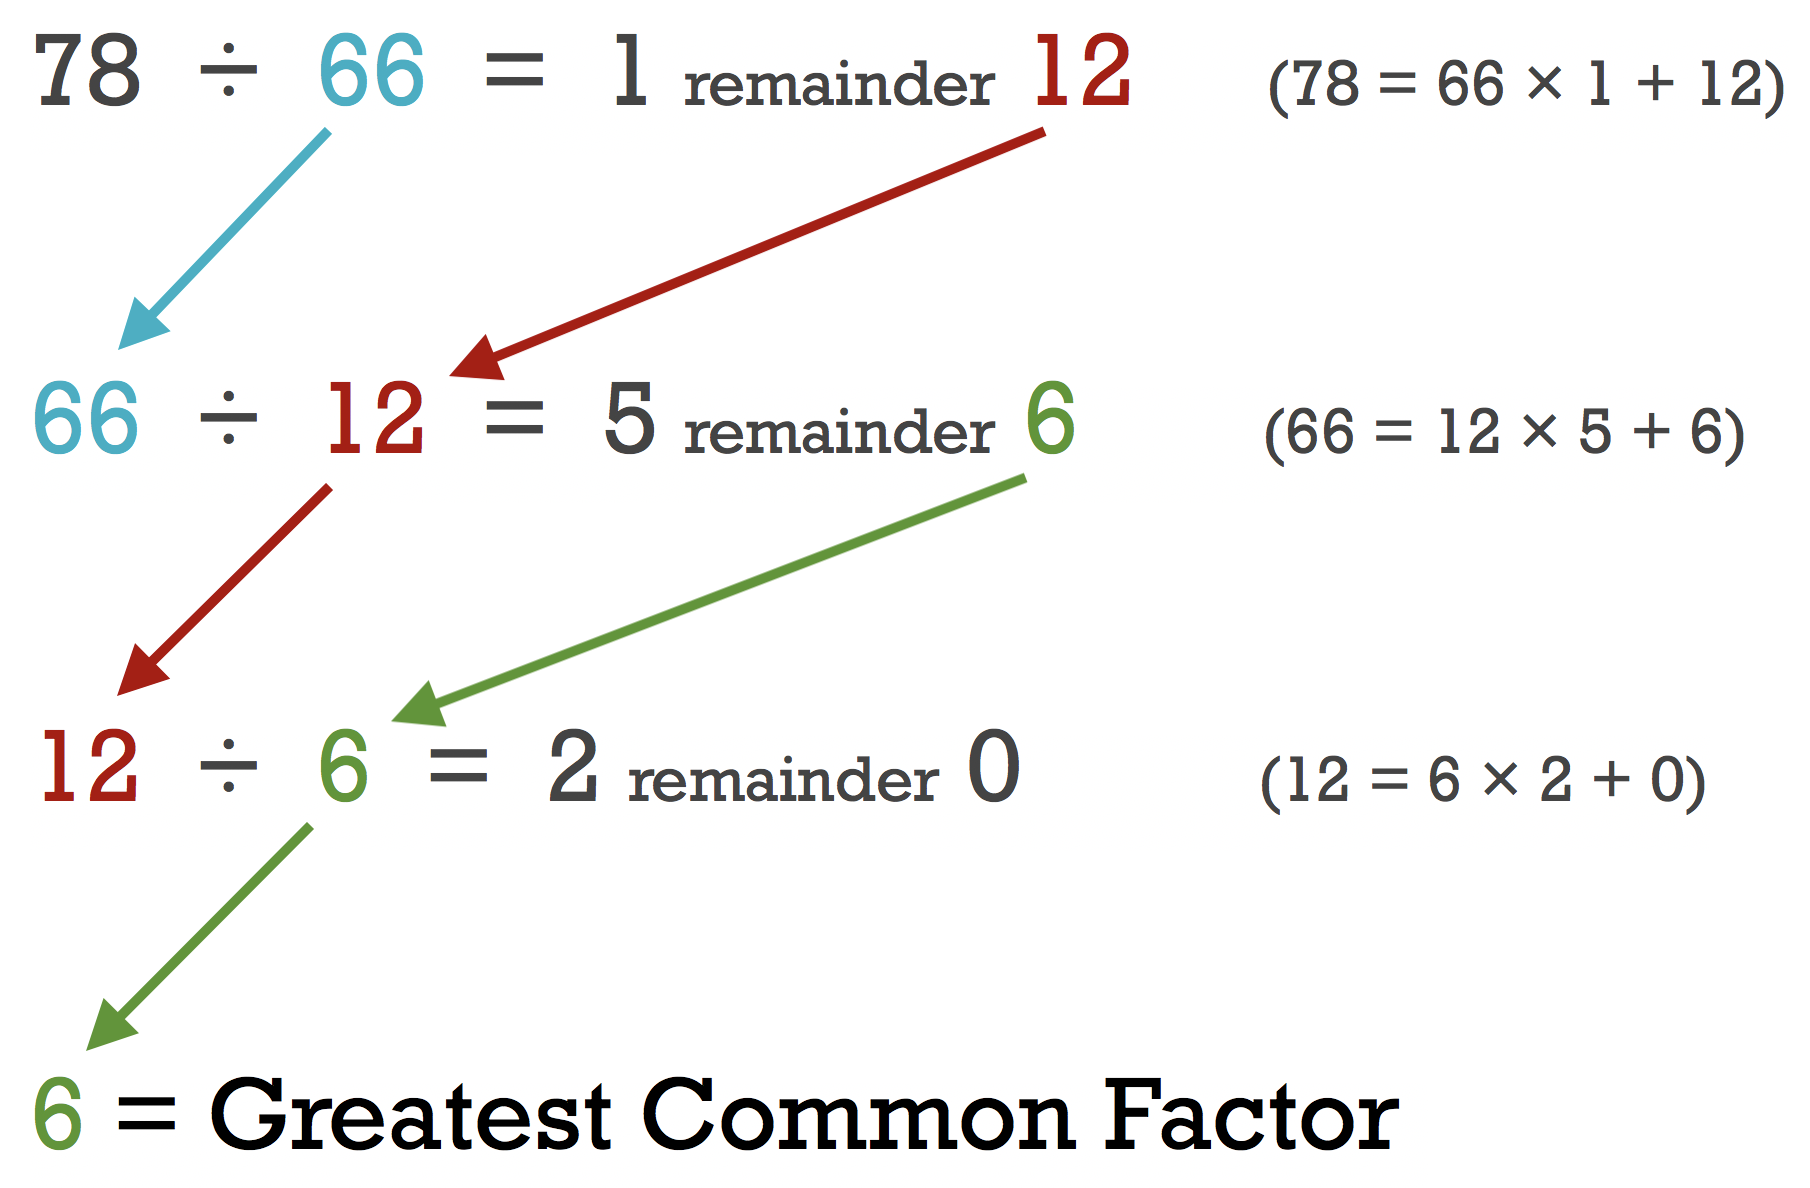 Equations using Euclid's algorithm proving that the greatest common factor of 78 and 66 is 6